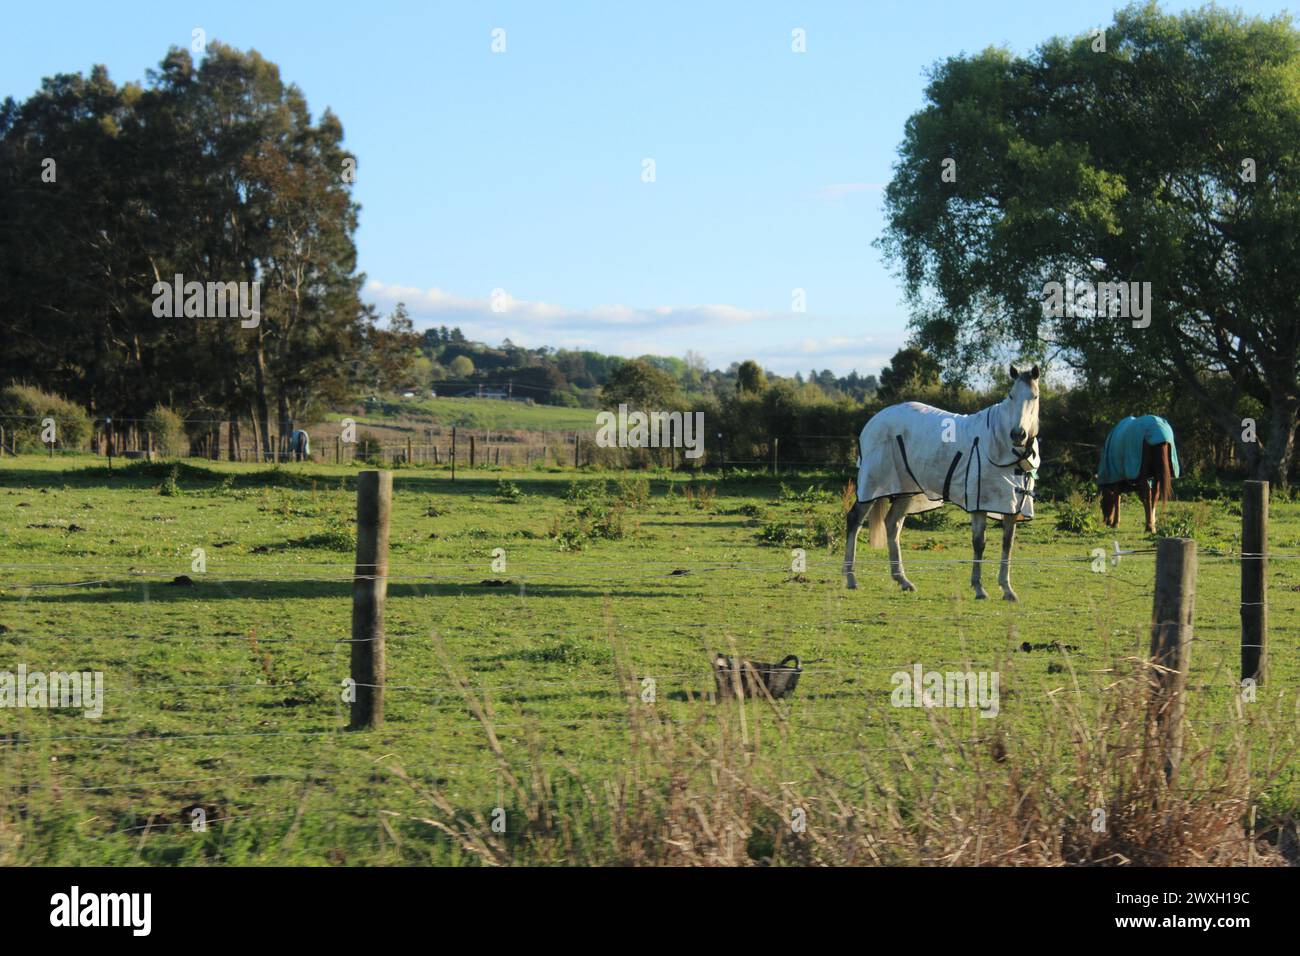 Two horses wearing horse blankets (another far in the background) Grazing in a lush green paddock in New Zealand Stock Photo